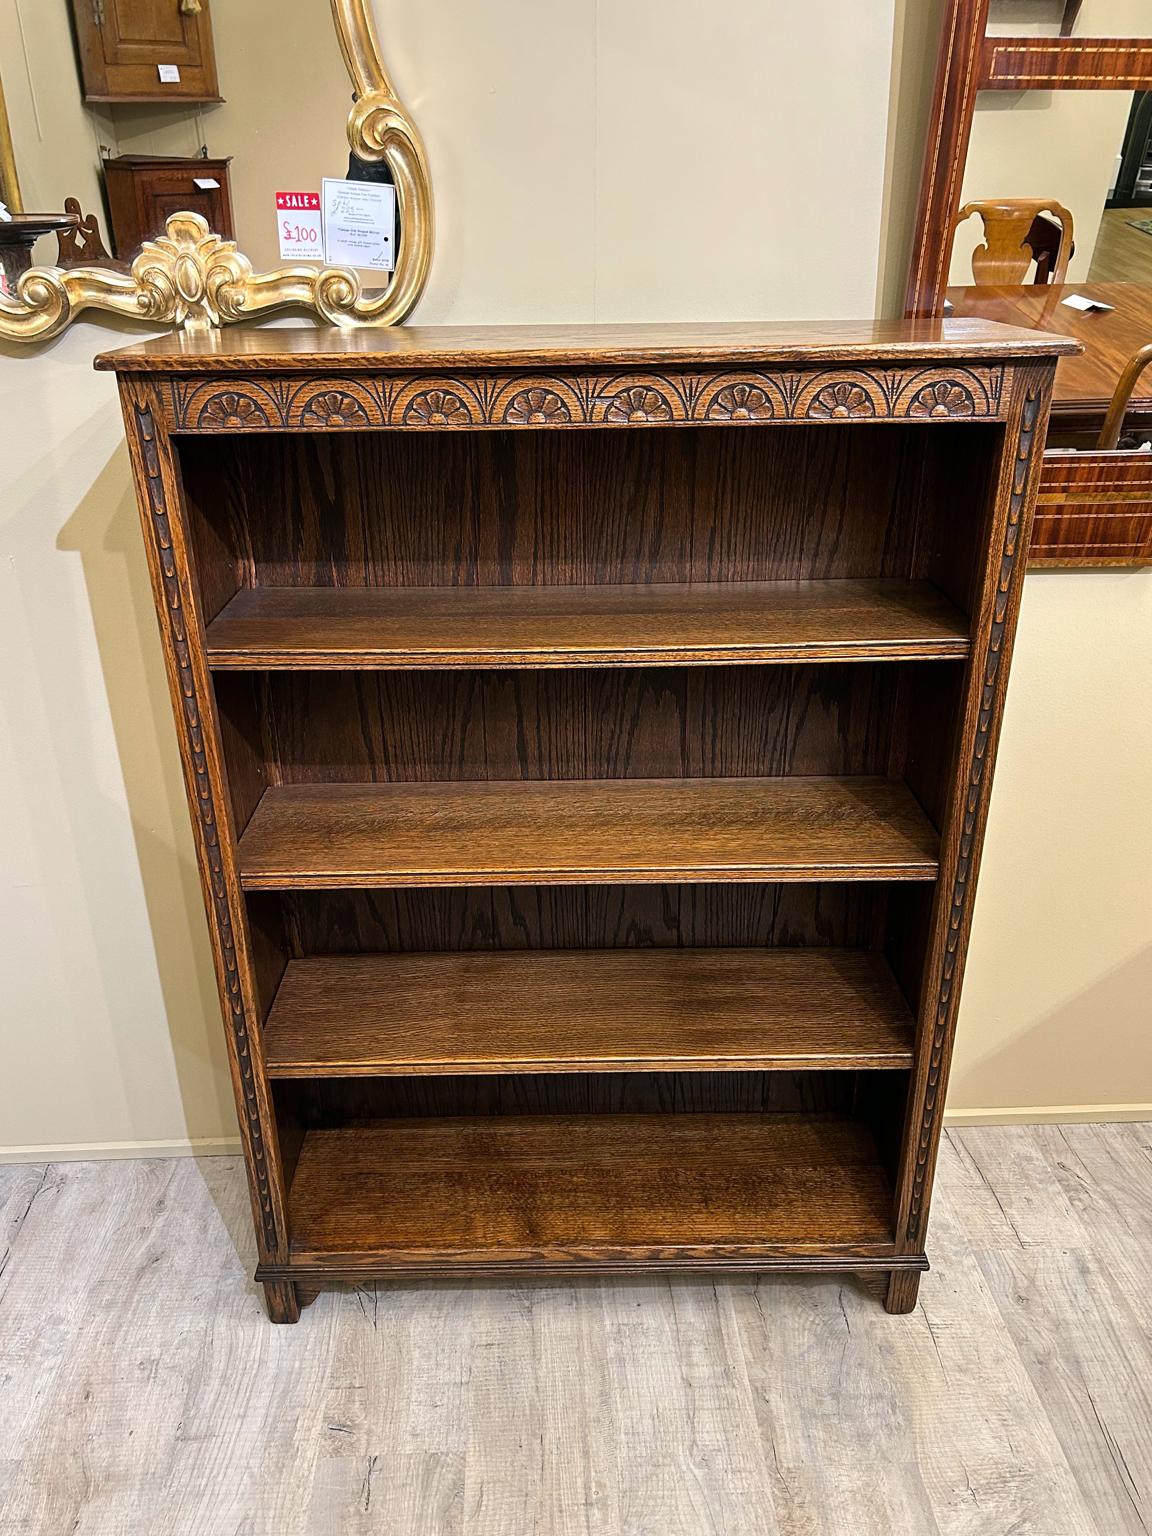 Vintage Oak Open Bookcase, fitted with three adjustable shelves on a plinth base.

Dimensions:
Height   53 inches – 135 cms
Width    39 inches – 99 cms
Depth   13 inches –  34 cms

Reference: BC2302